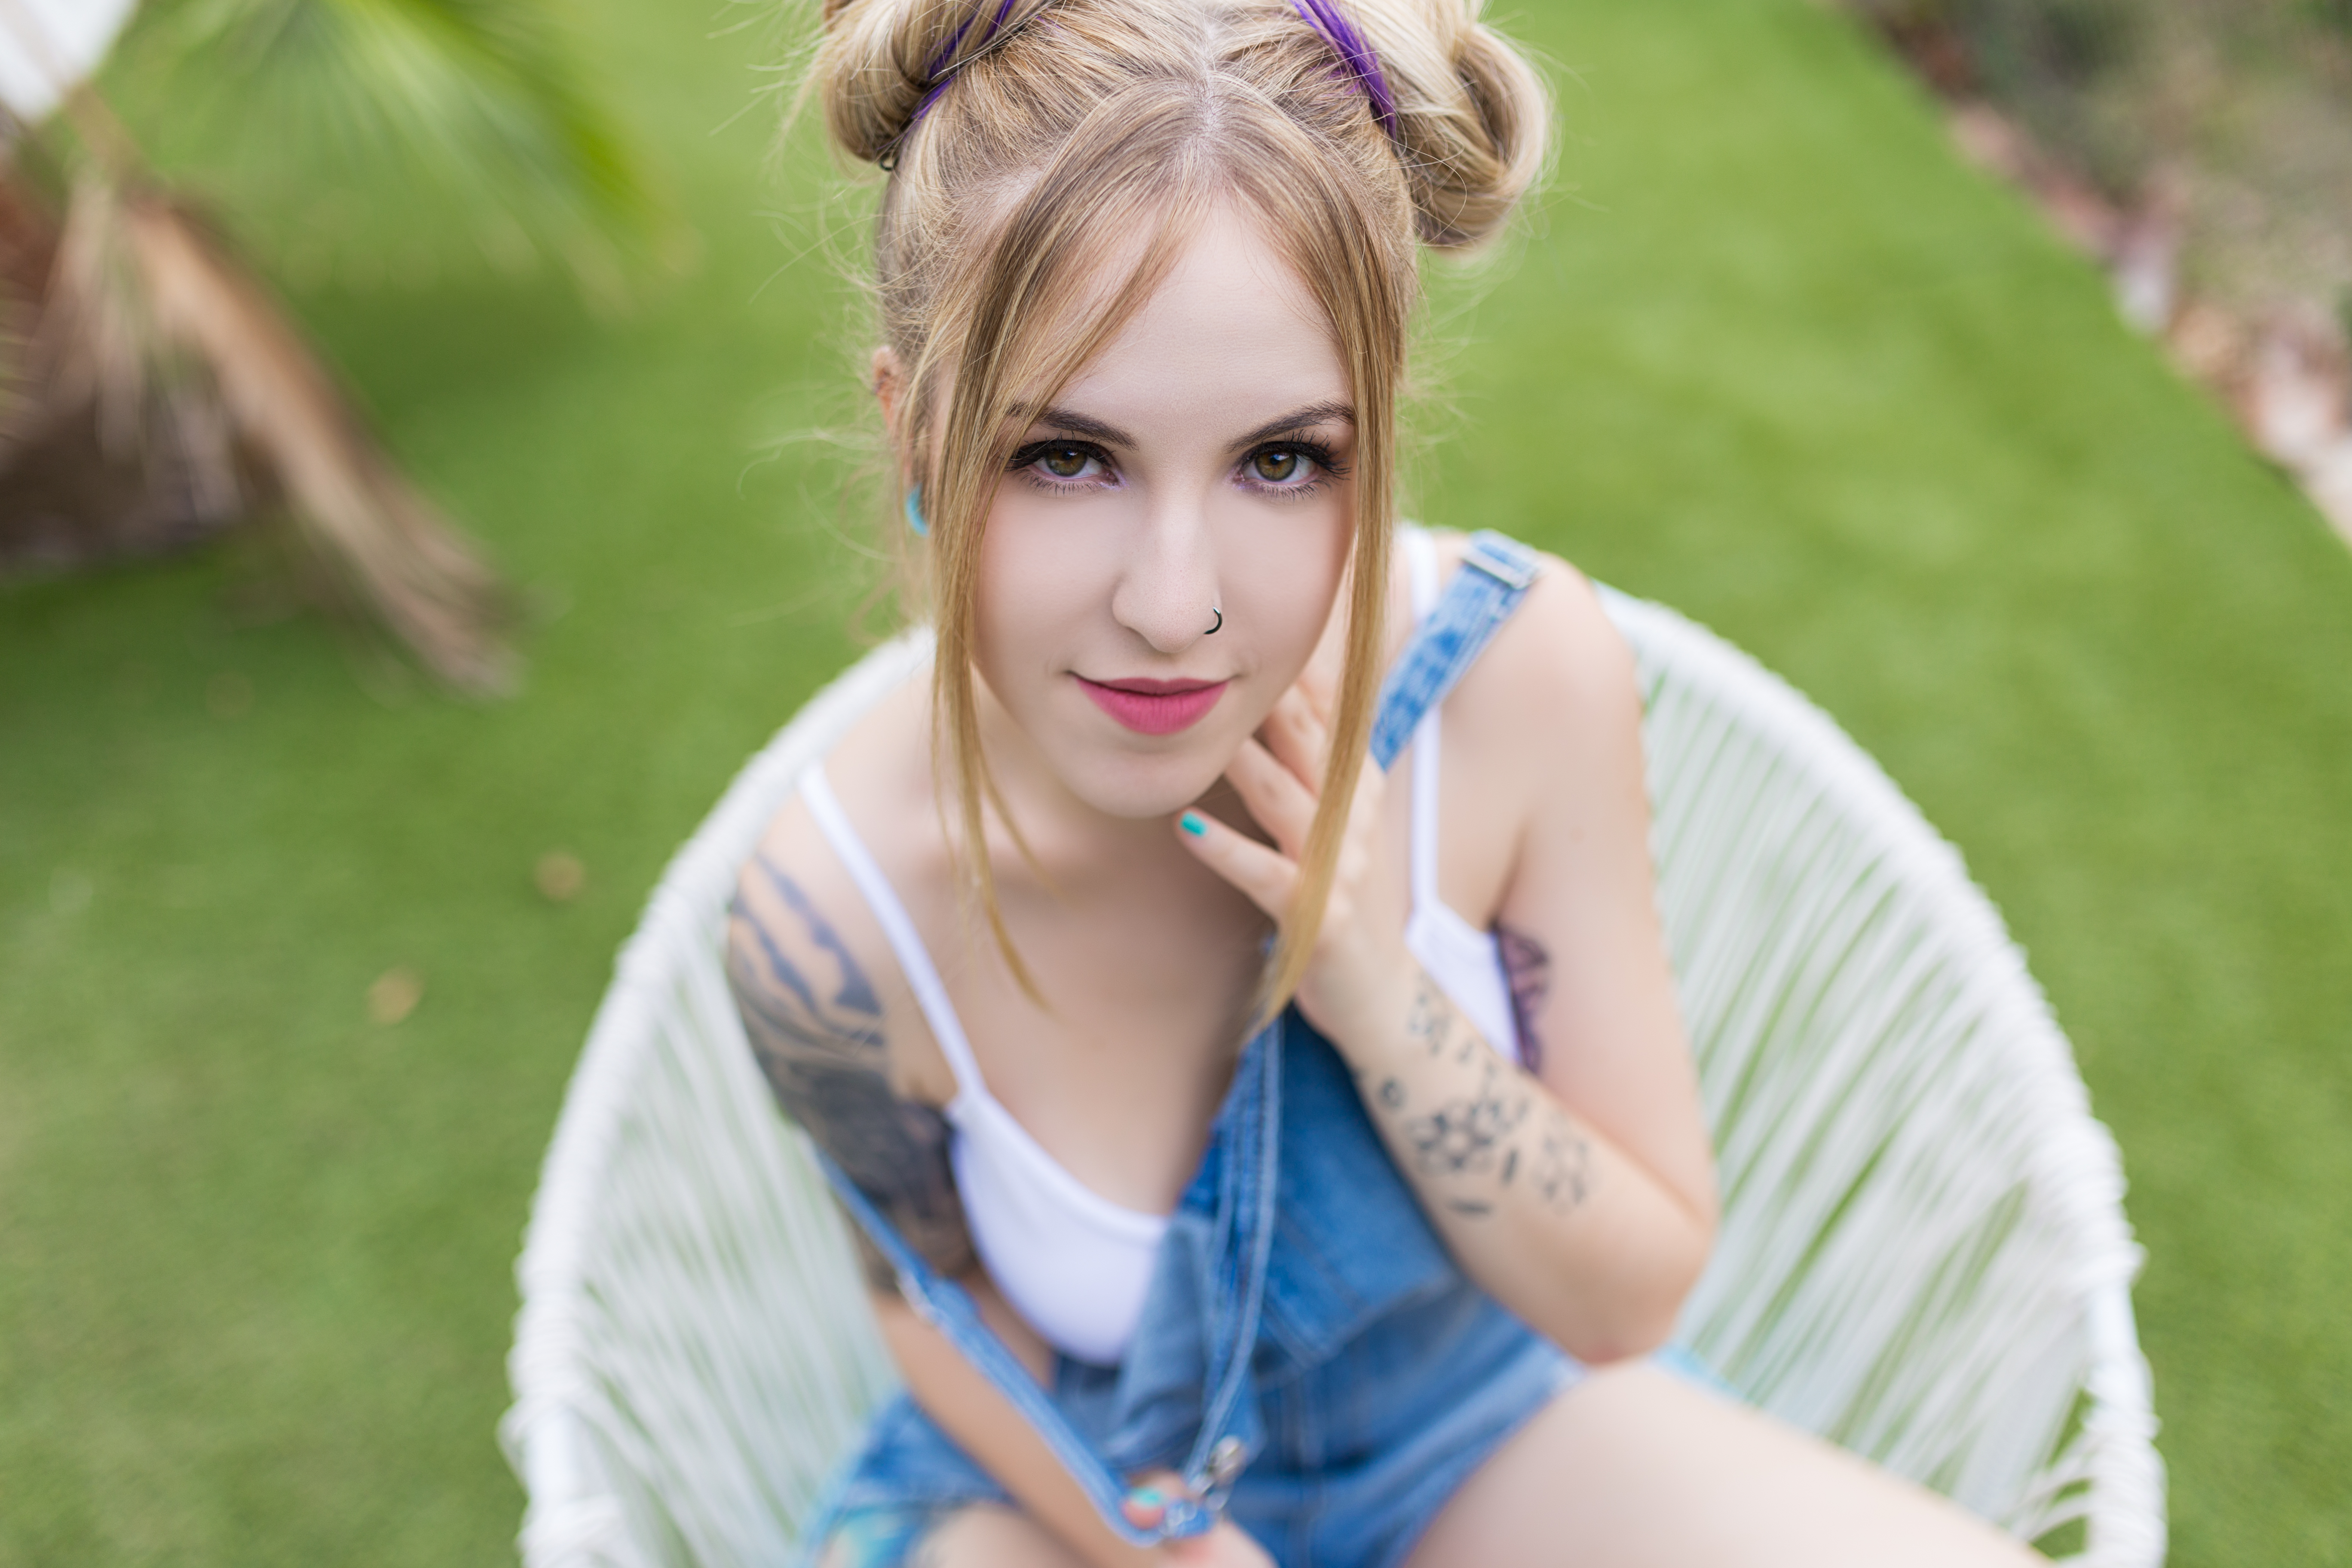 Beautiful Sexy Suicide Girl Trece Glazed 1 High resolution lossless image.